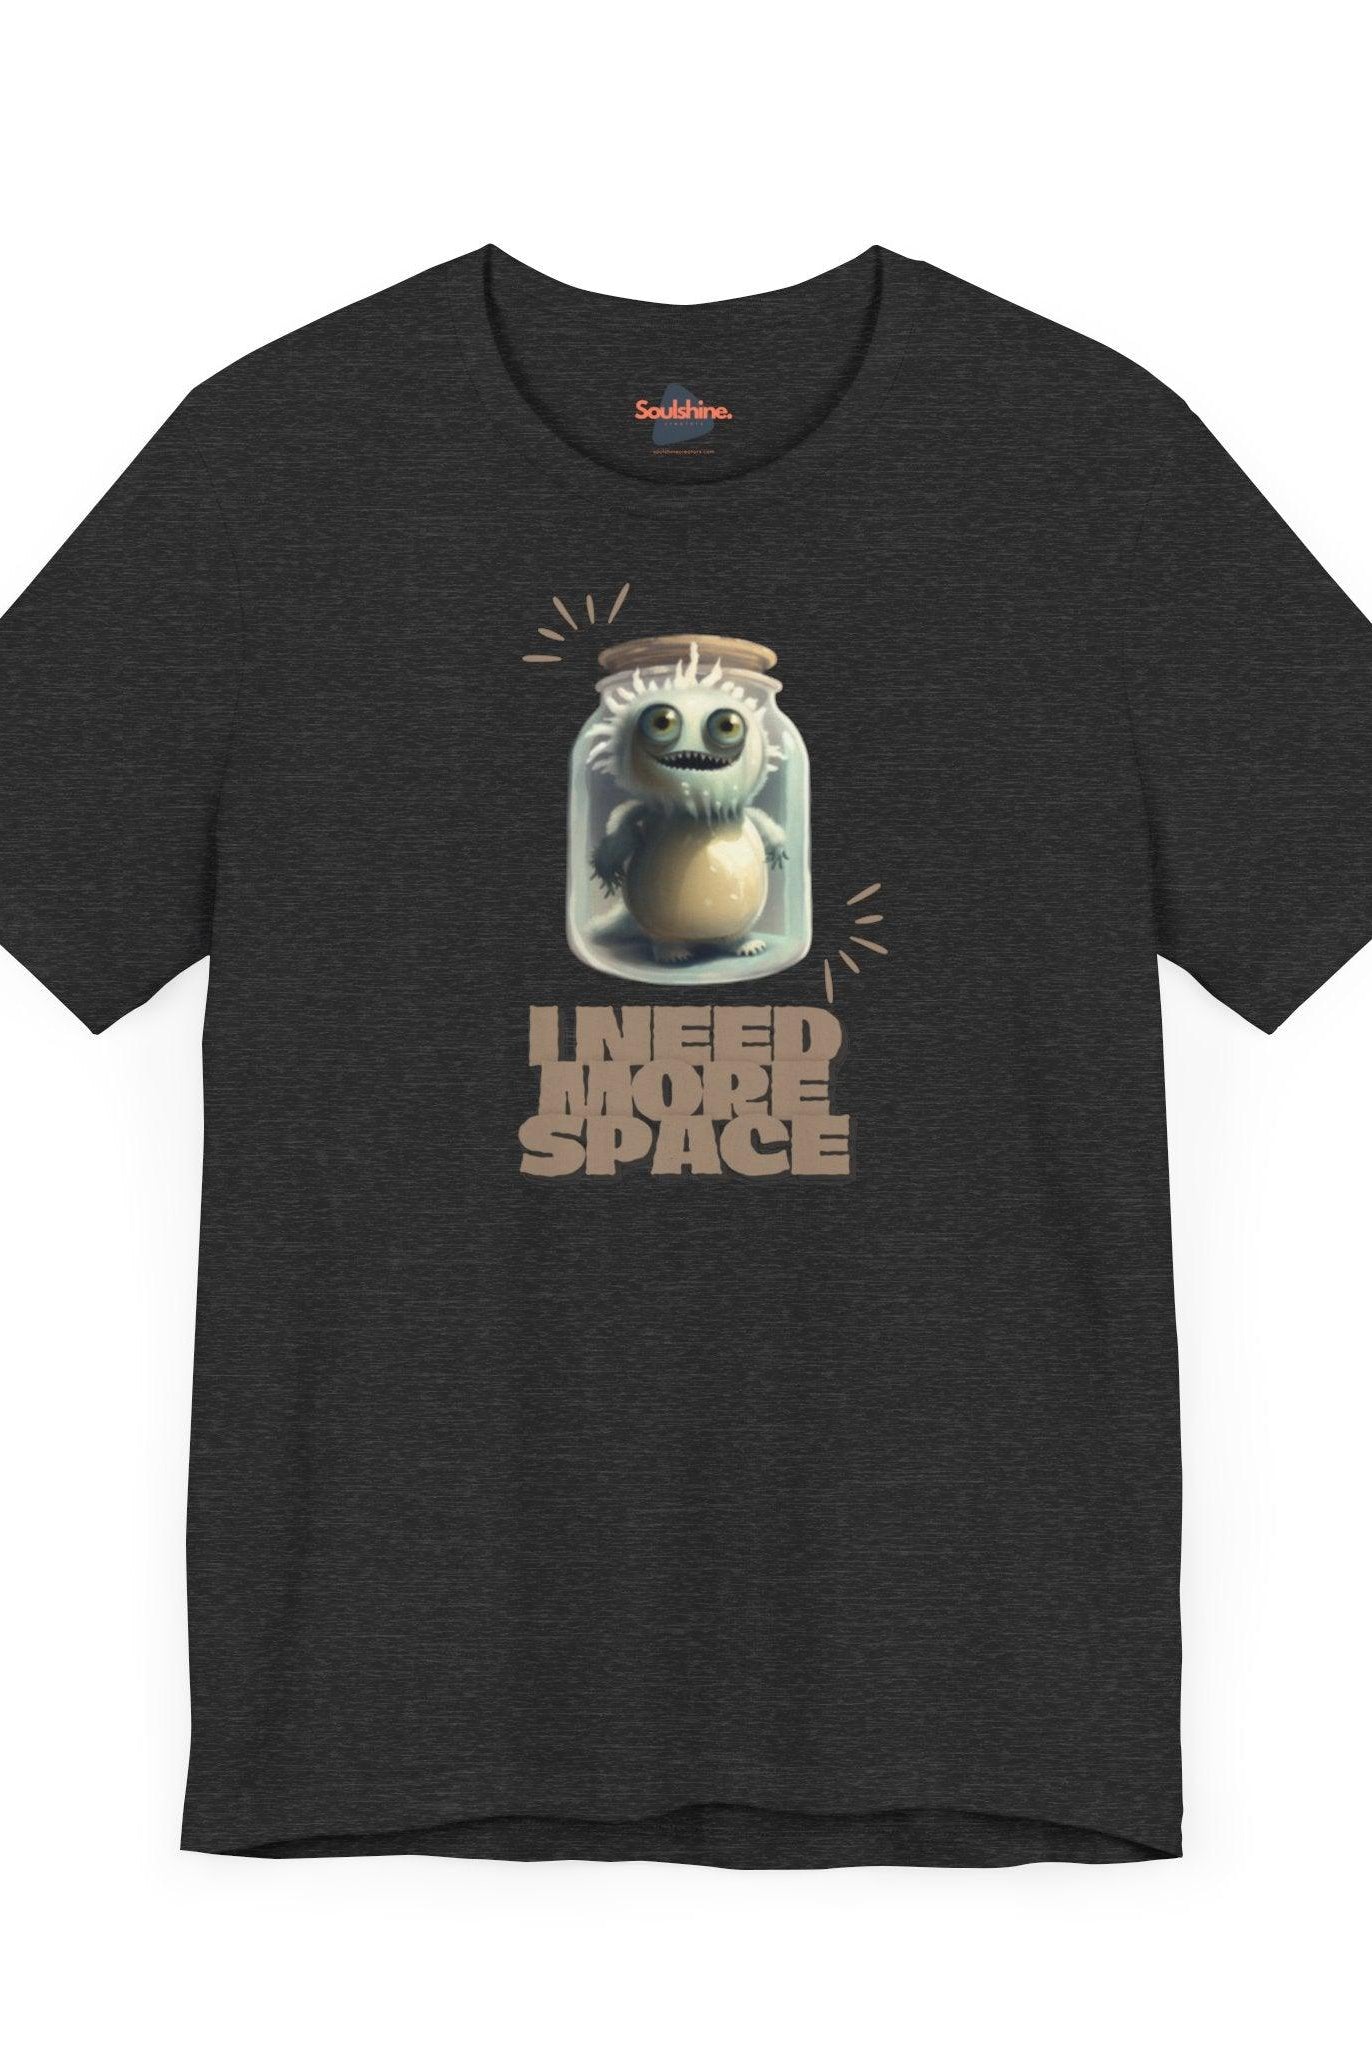 I need more space - Funny T-Shirt - Soulshinecreators - Bella & Canvas - EU T-Shirt by Soulshinecreators | Soulshinecreators